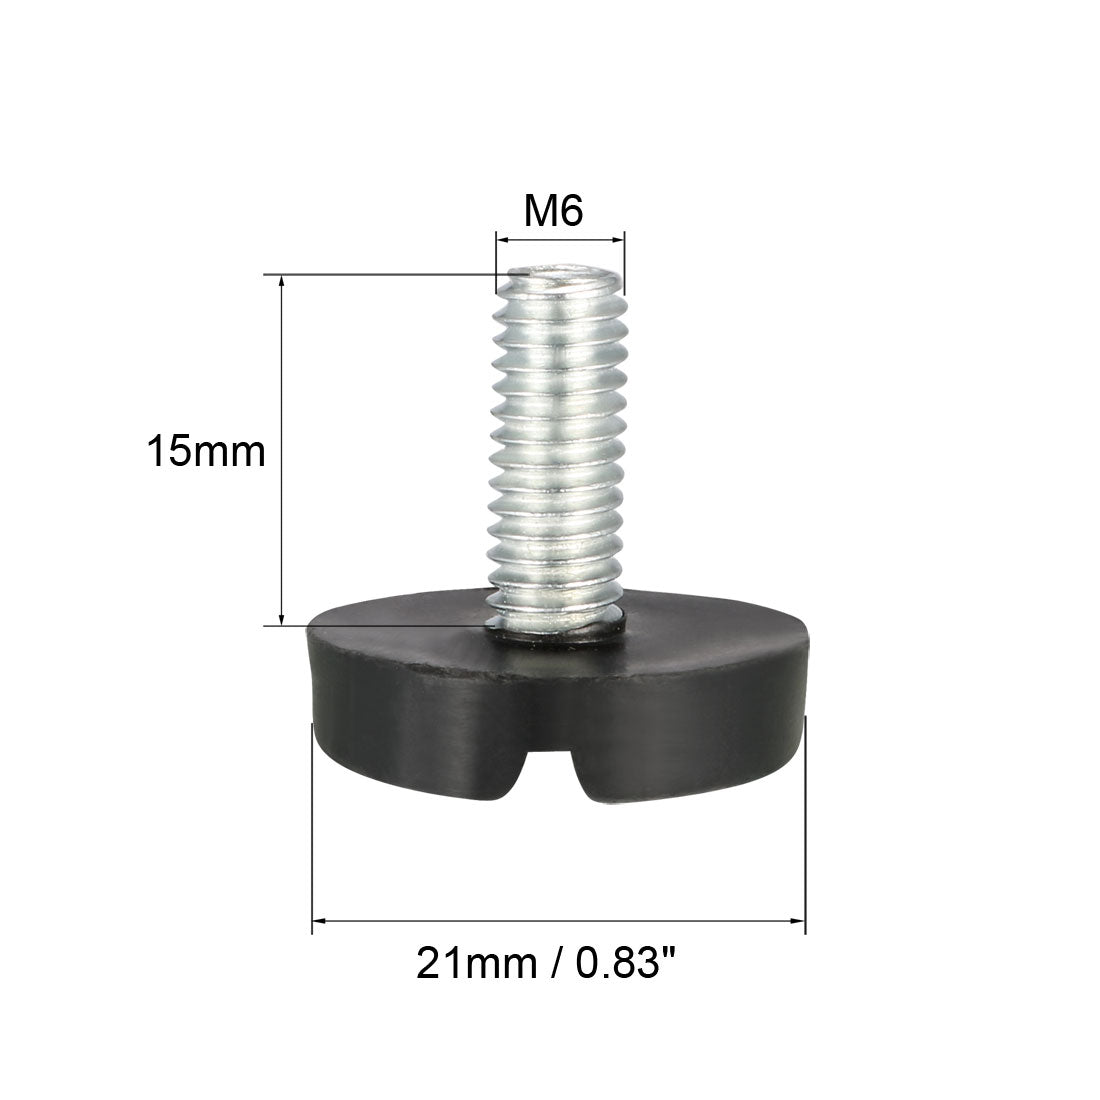 uxcell Uxcell Furniture Levelers, 6mm to 10mm Adjustable Height M6 x 15mm Threaded, 16 Pcs